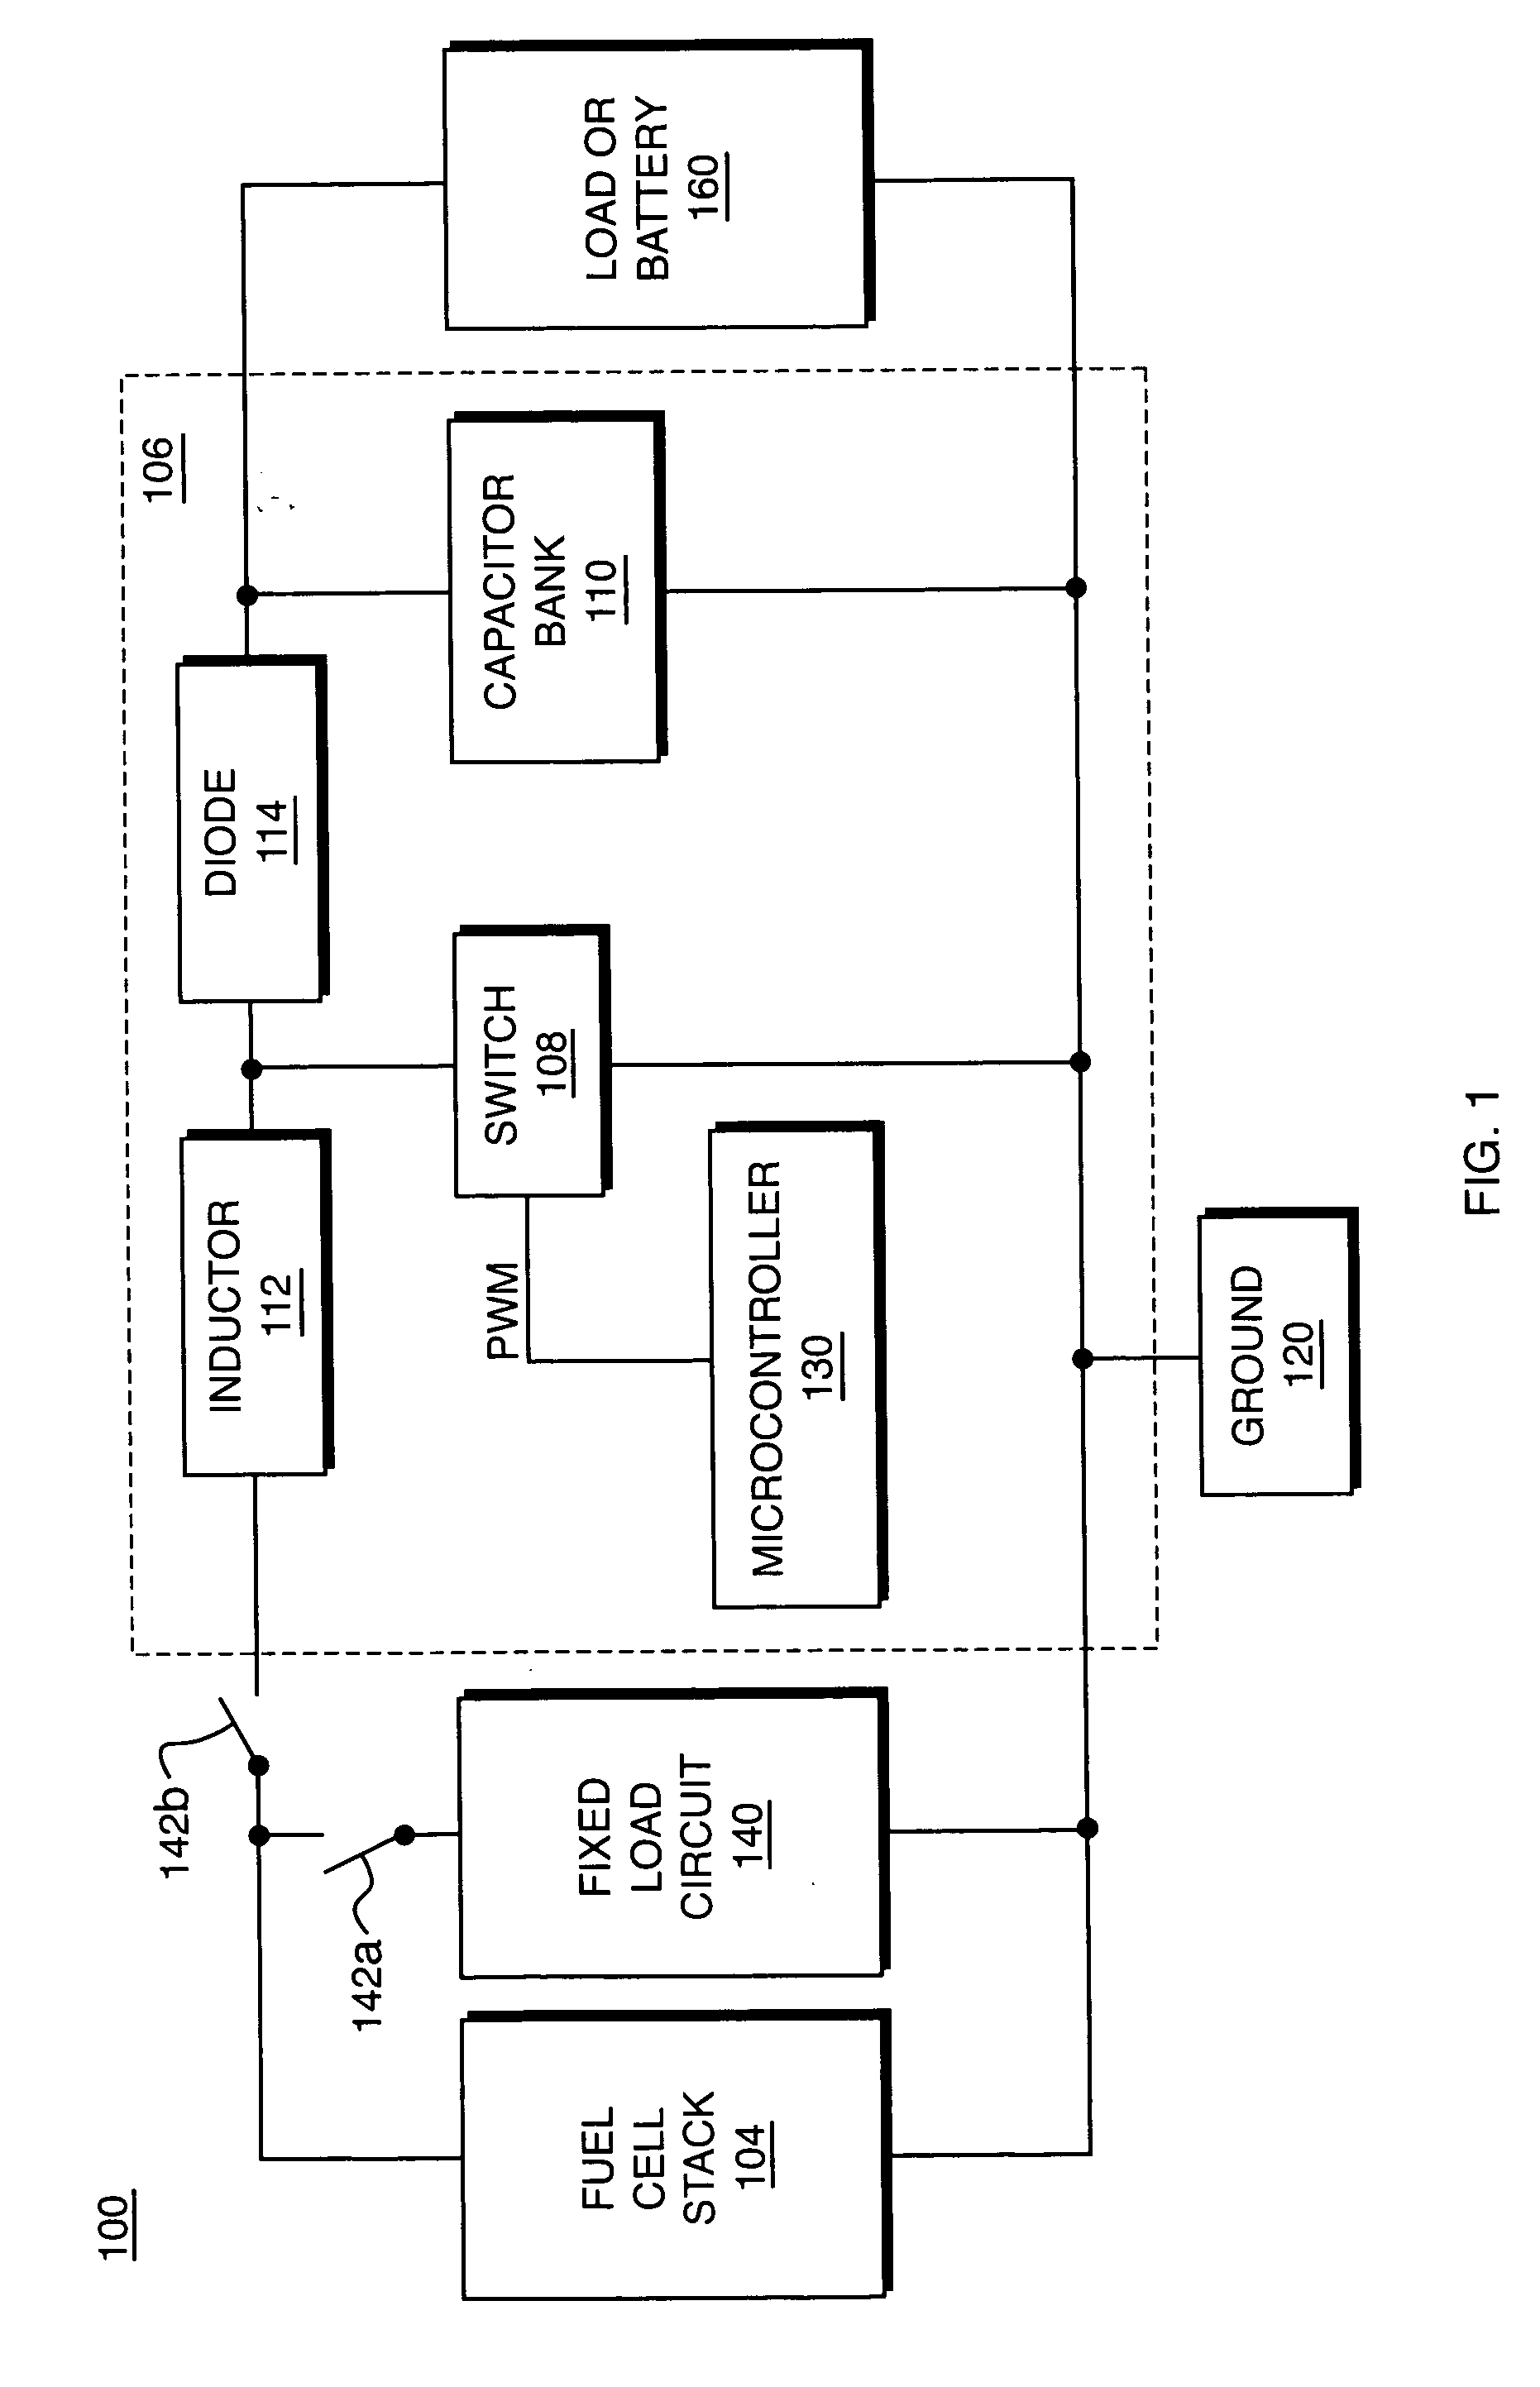 Automatic measurement of fuel cell resistance